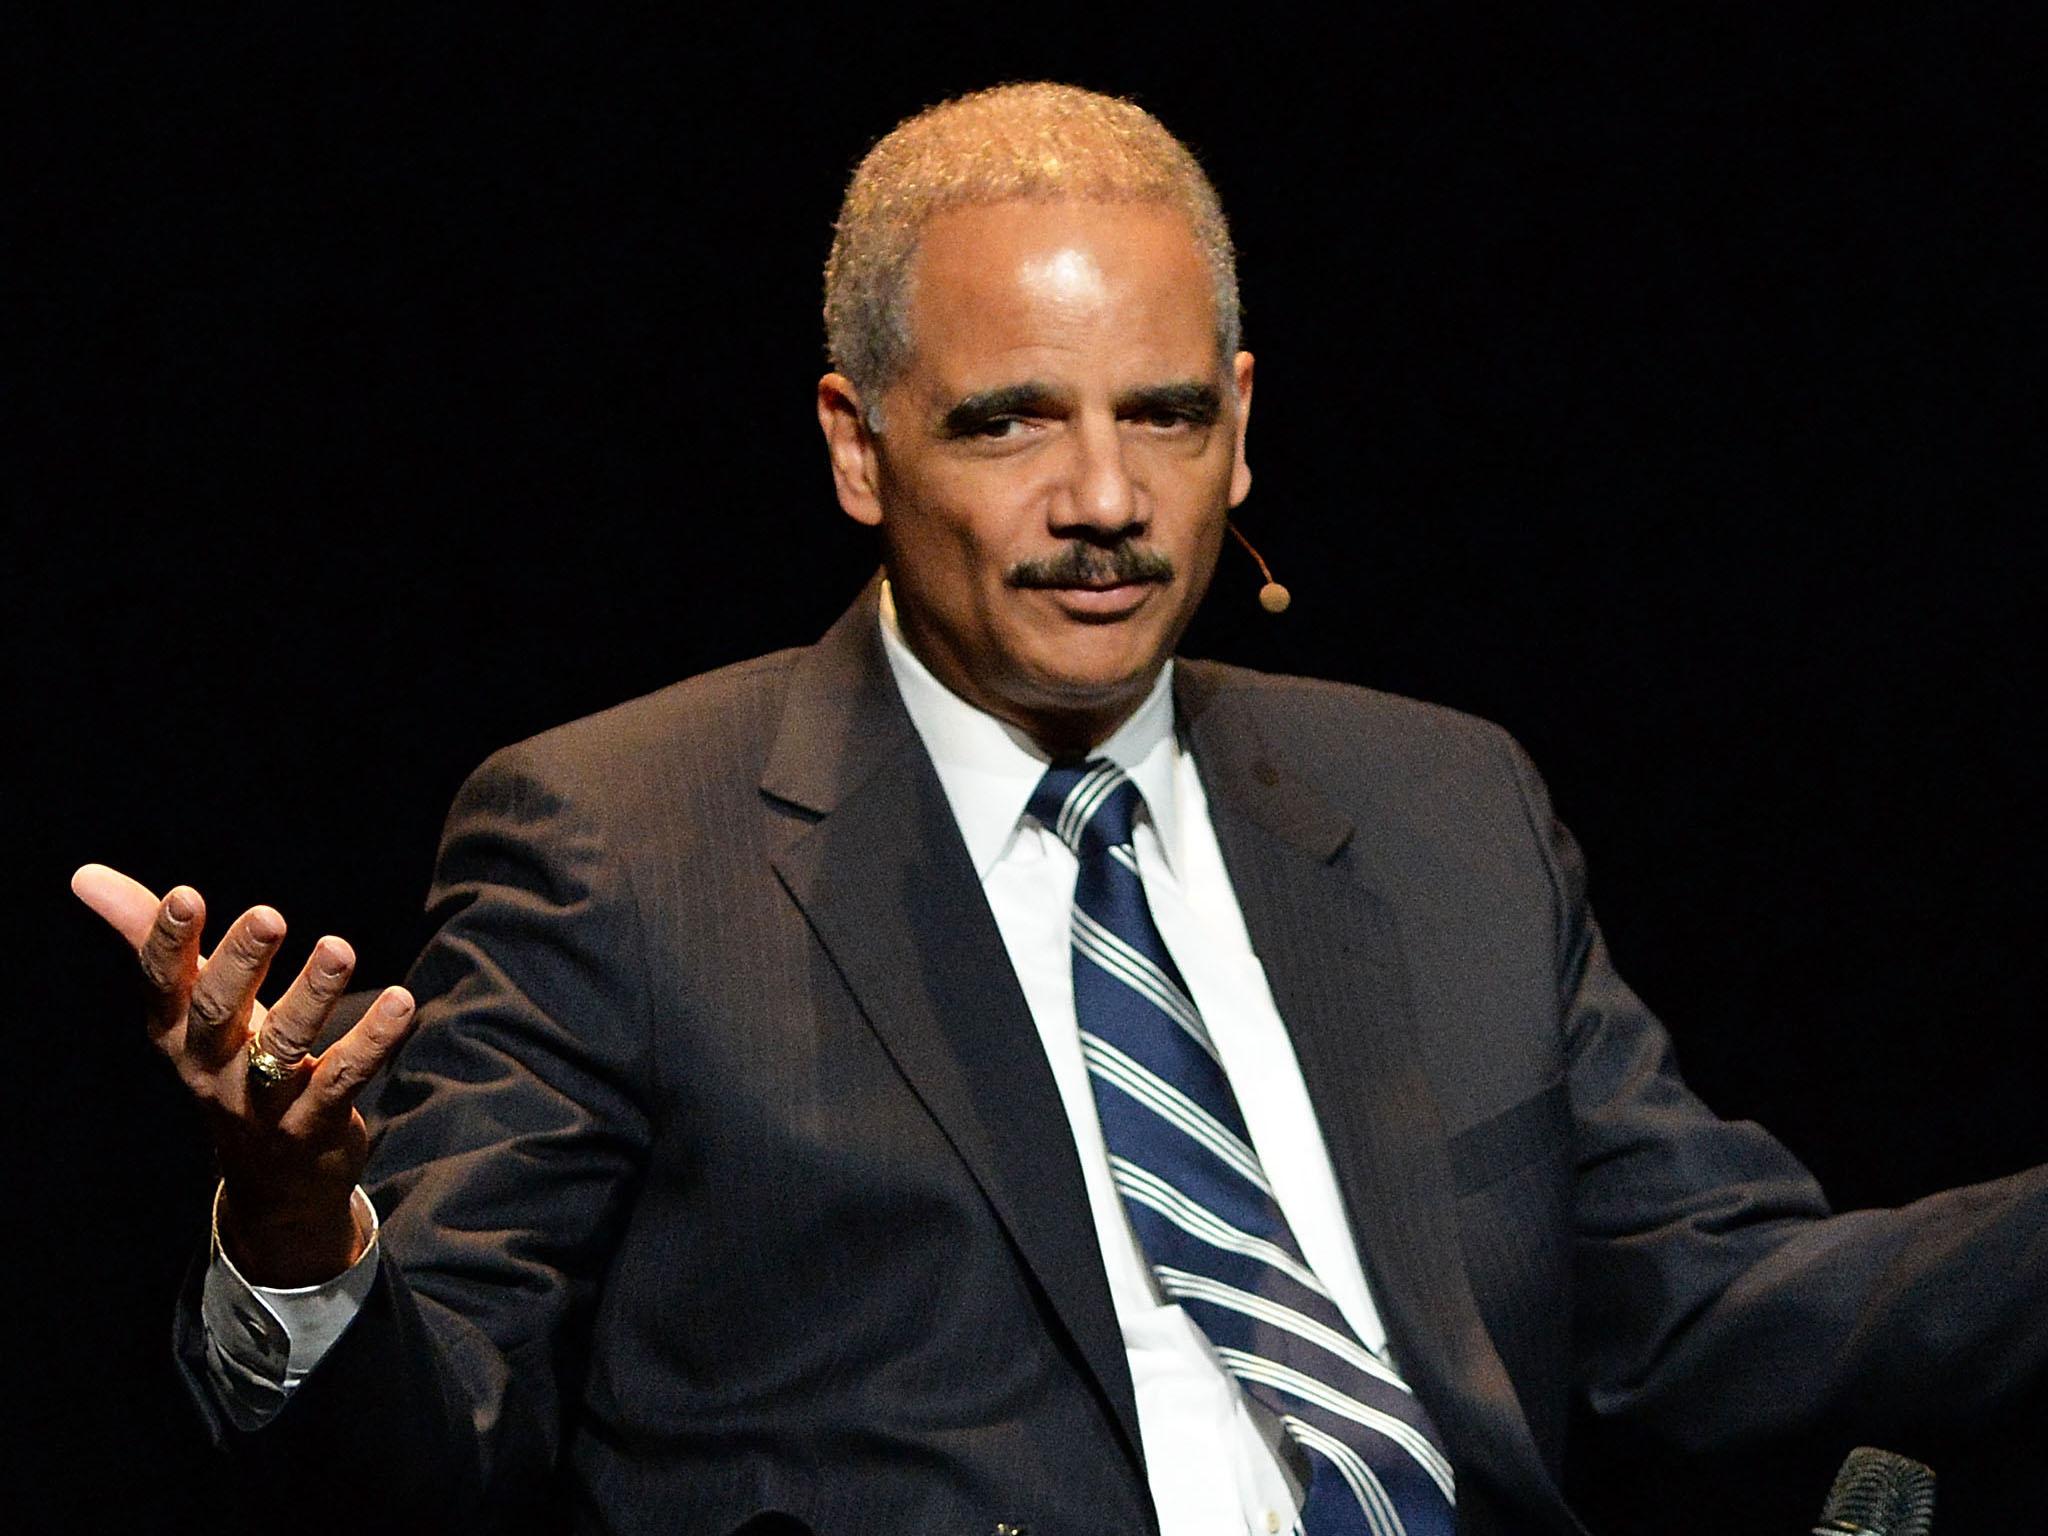 Last year, Airbnb hired Eric Holder to help craft a policy to combat discrimination occurring through the online lodging service’s platform